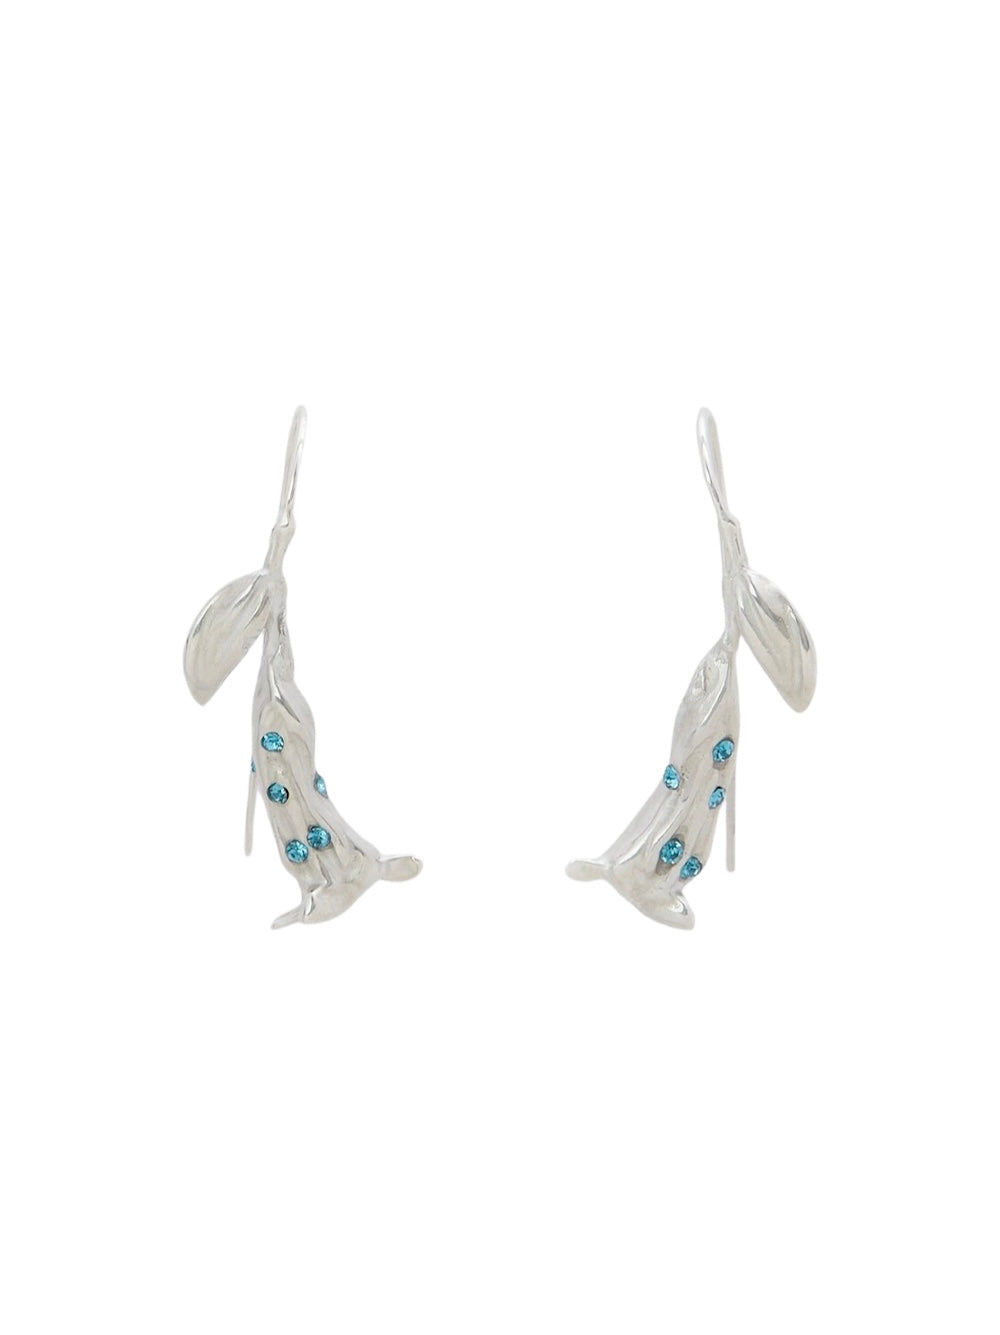 Marni Metal Calla Lily Earrings With Crystals